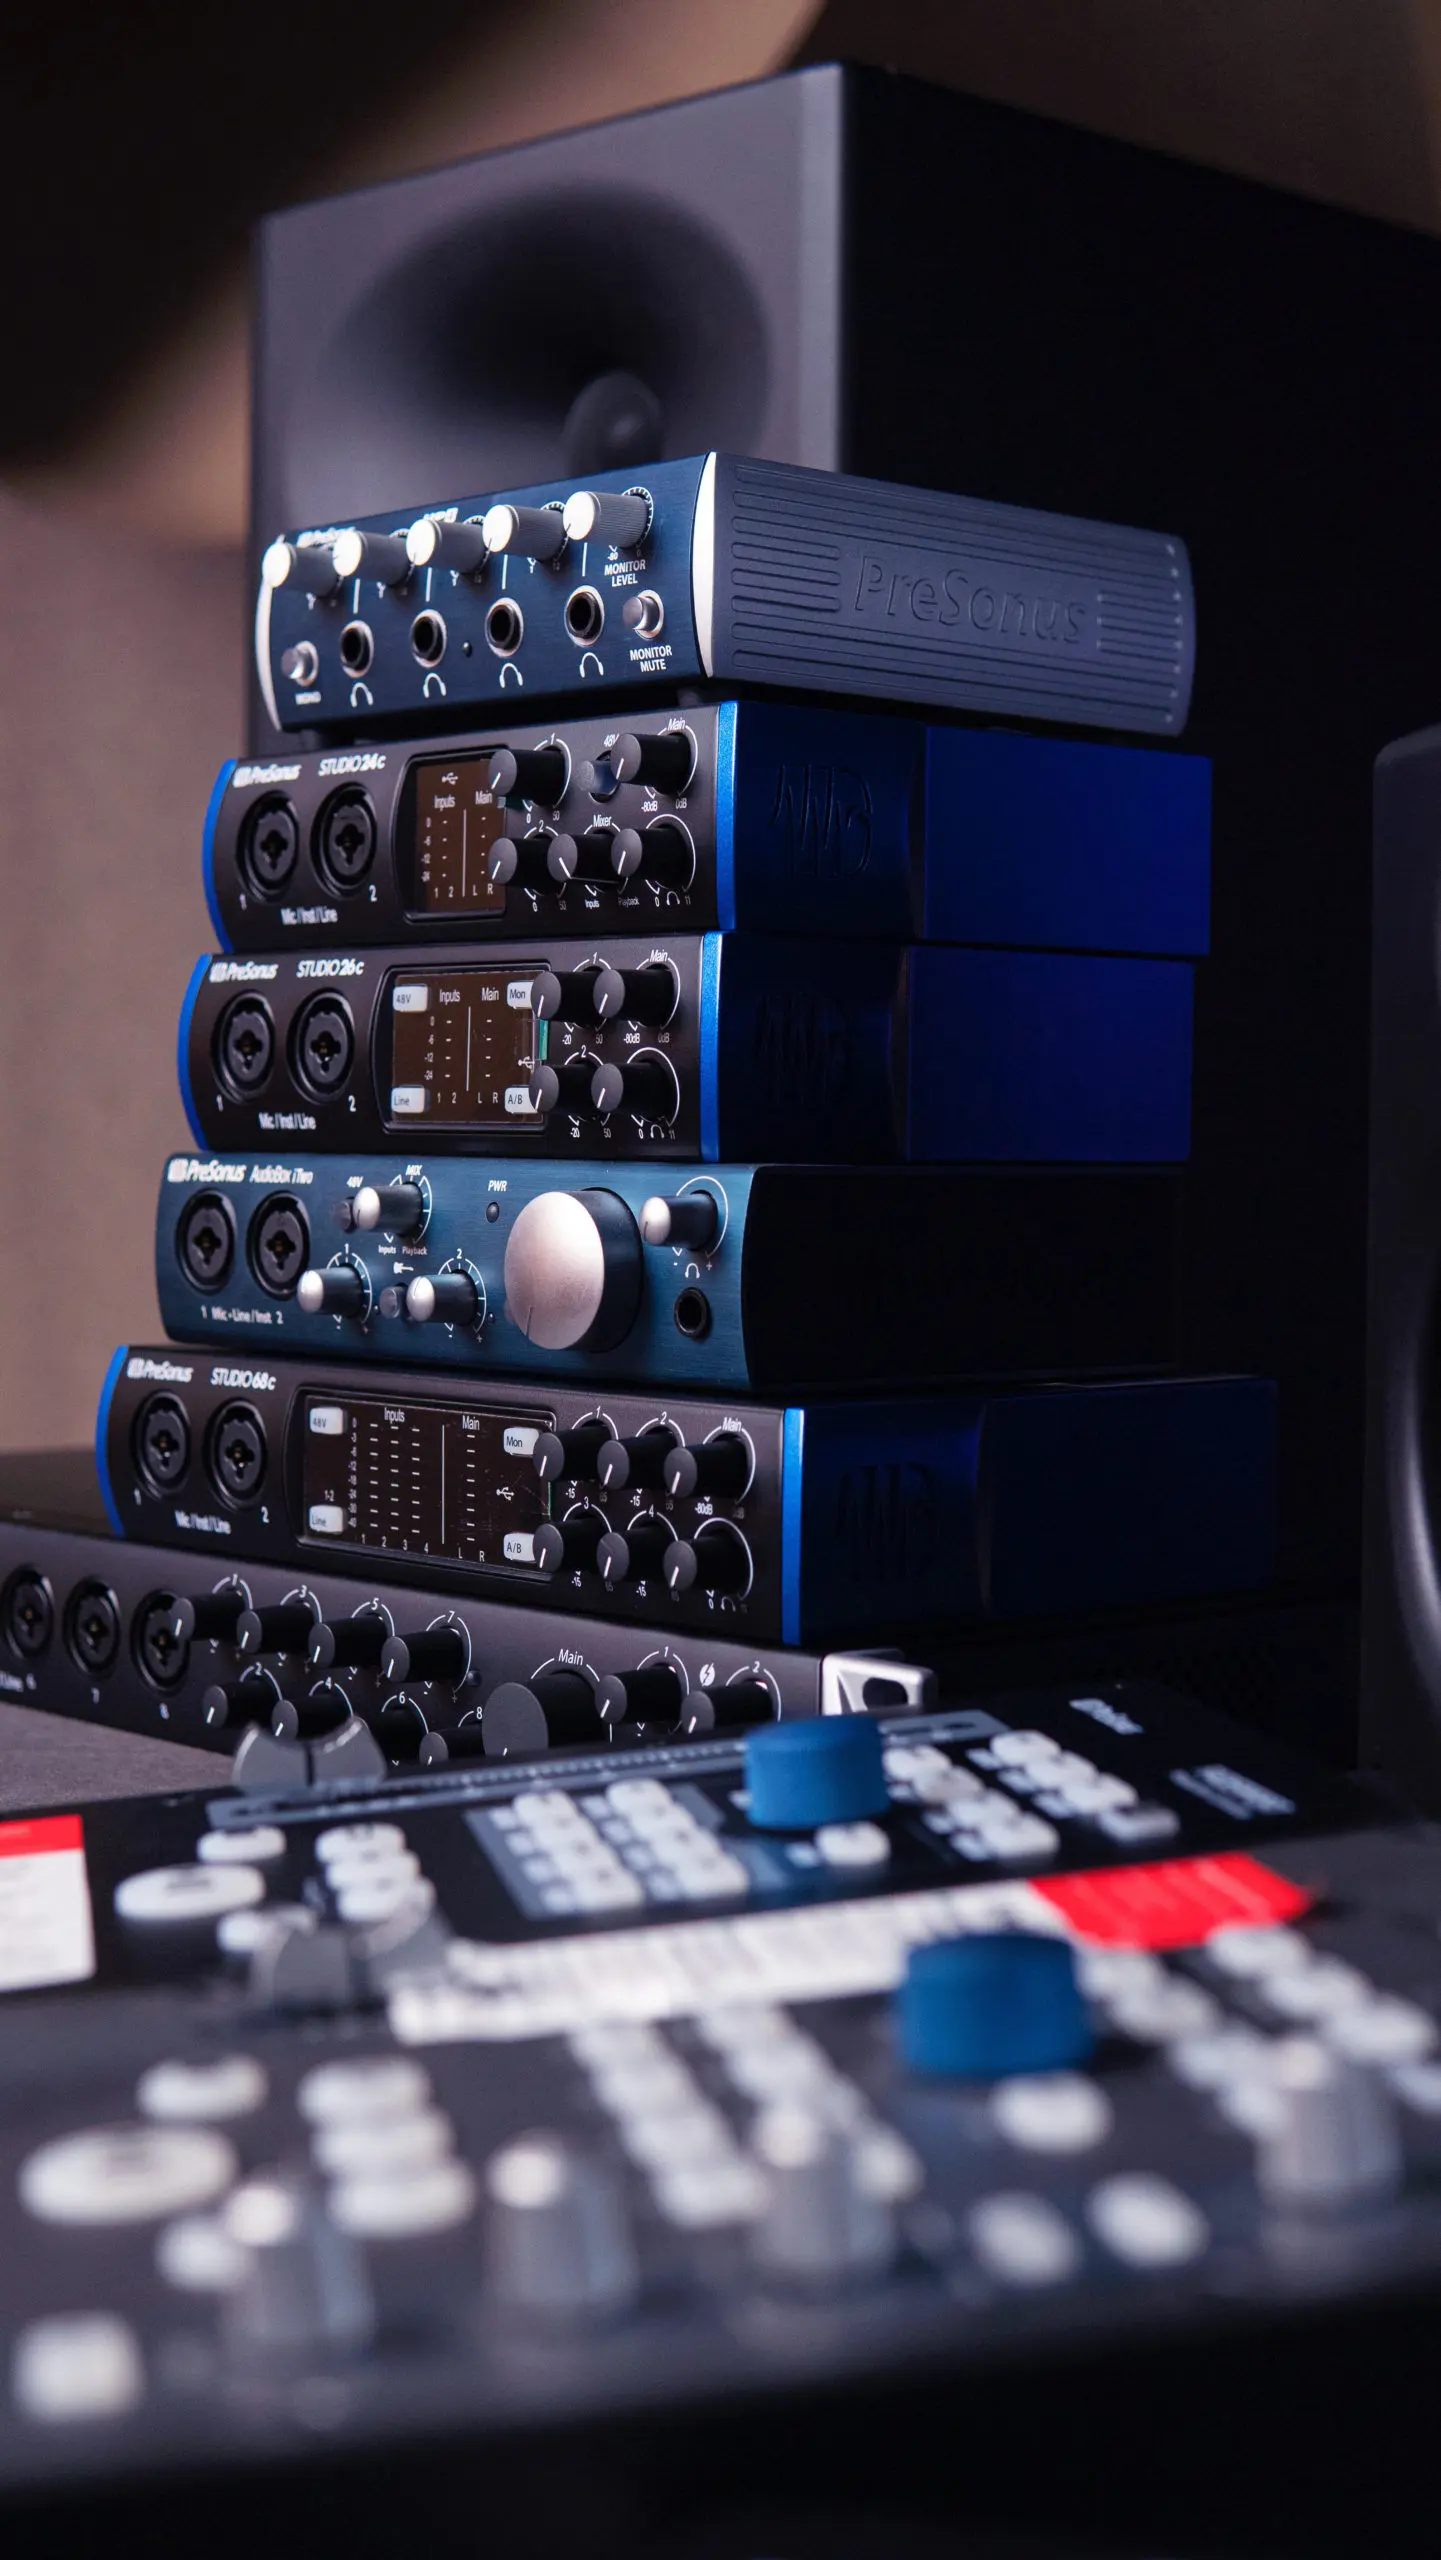 An audio interface is an essential tool for musicians and producers, allowing them to connect microphones, instruments, and other audio gear to a computer for recording, mixing, and editing.